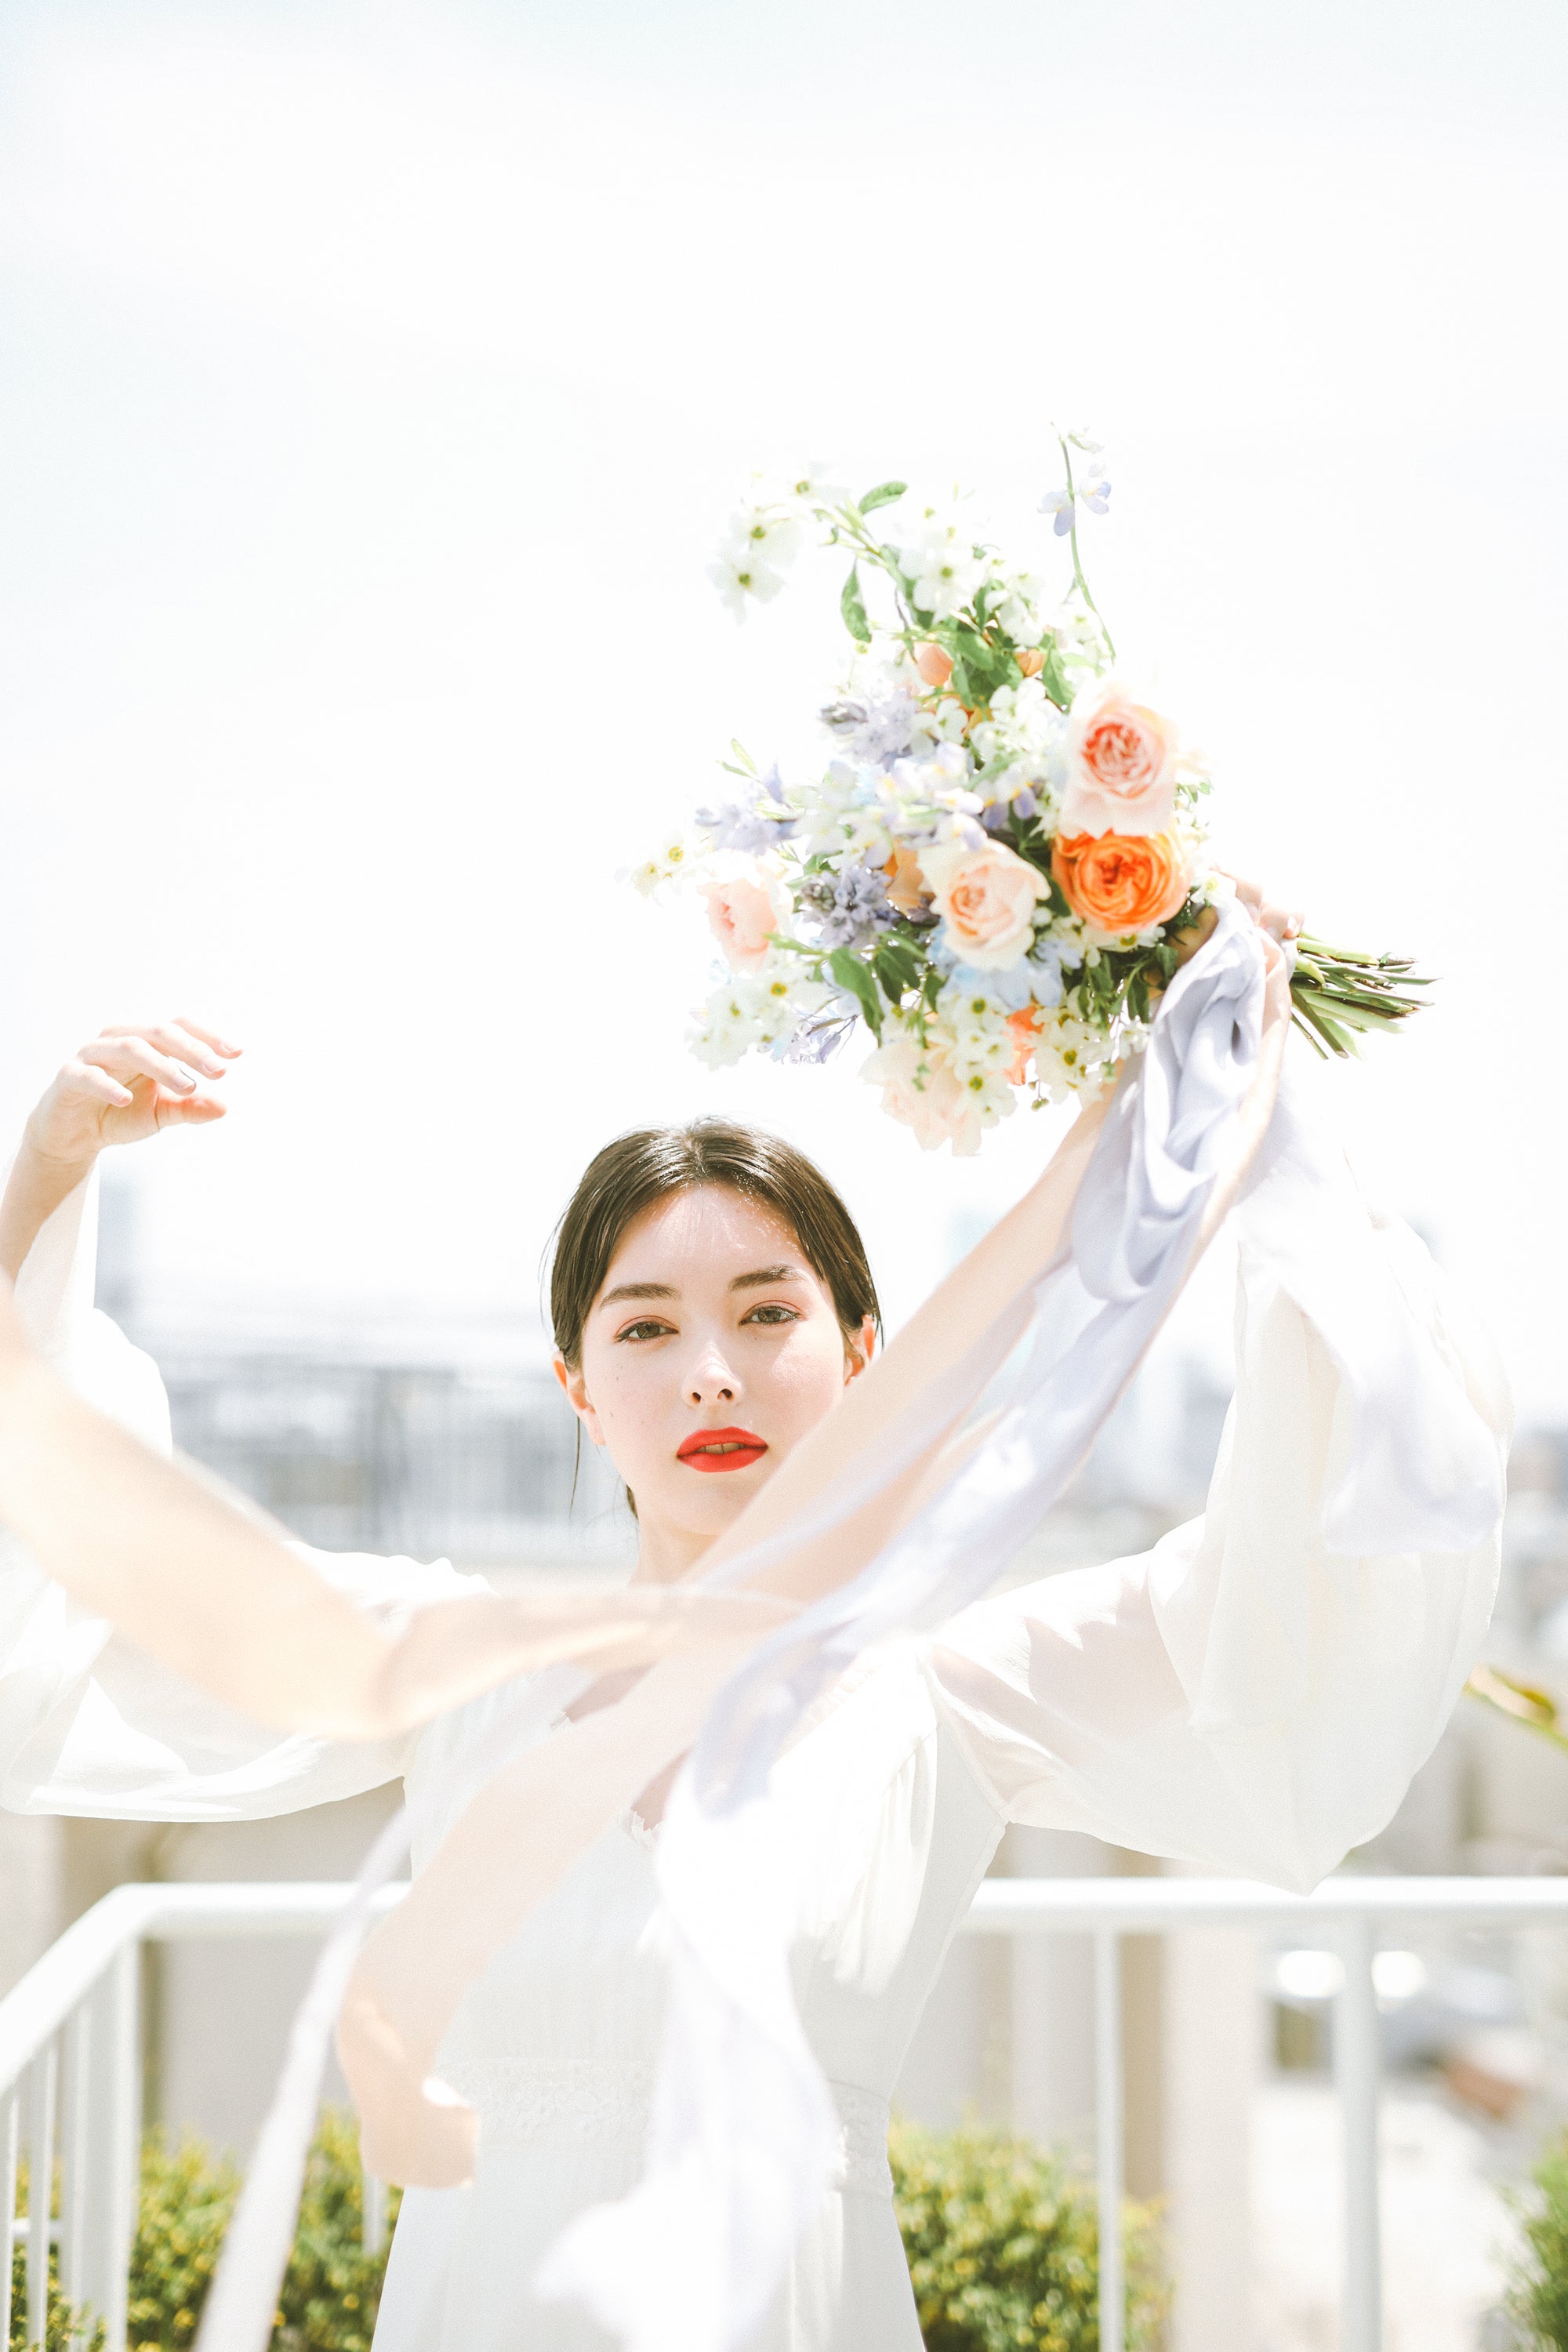 2021 / STYLED SHOOT IN TOKYO